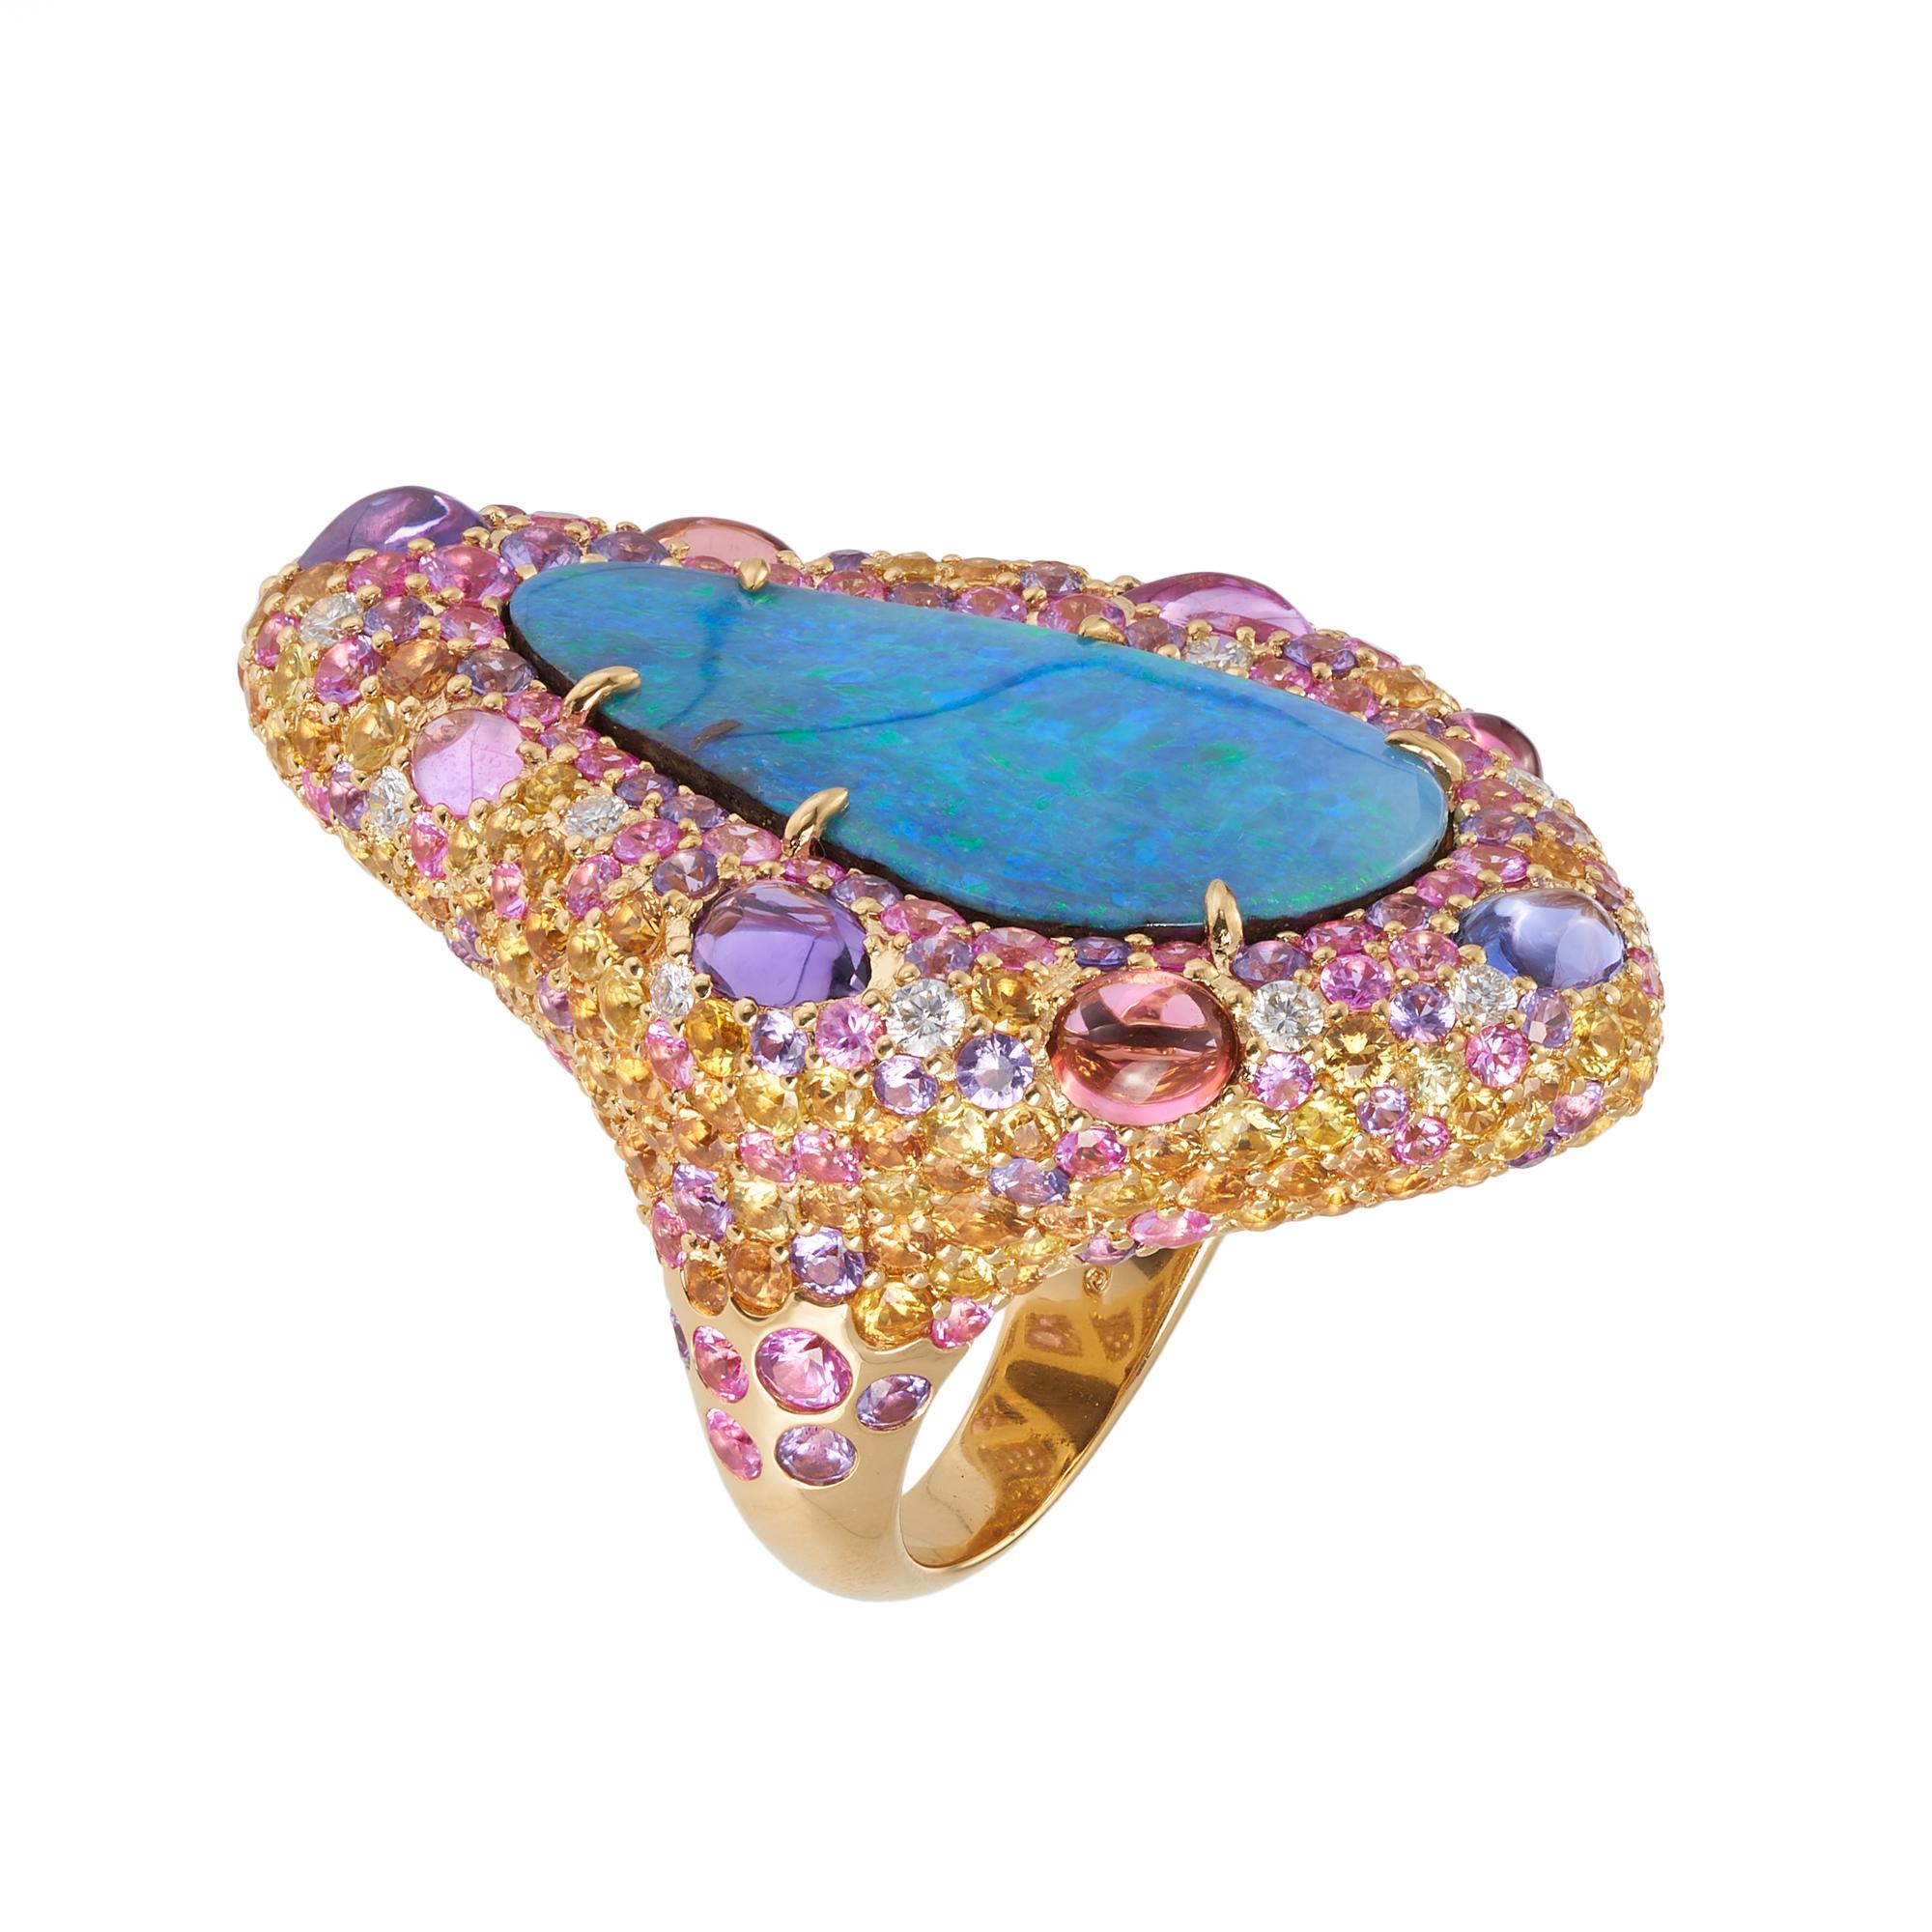 18karat Yellow Gold Opal Ring, featuring a 17.53cts Solid Natural Queensland Boulder Opal surrounded by diamonds 0.45ct, yellow sapphires 5.82cts, pink sapphires 3.35cts, purple sapphires 2.76cts, tanzanite 0.37ct, amethyst 0.36ct and pink